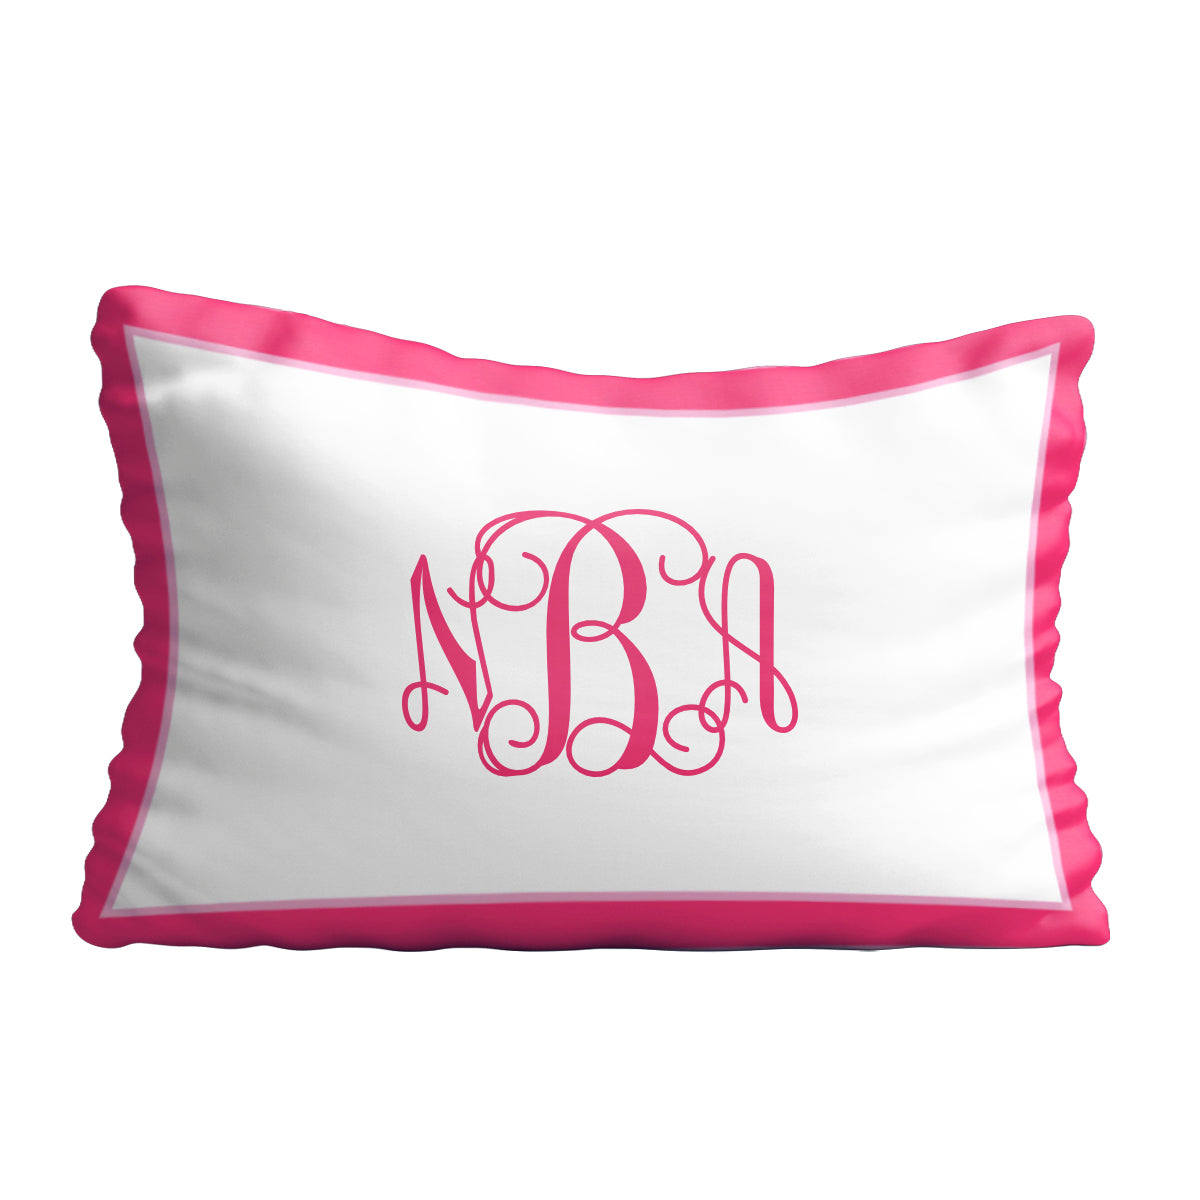 Monogram white and pink pillow case - Wimziy&Co.